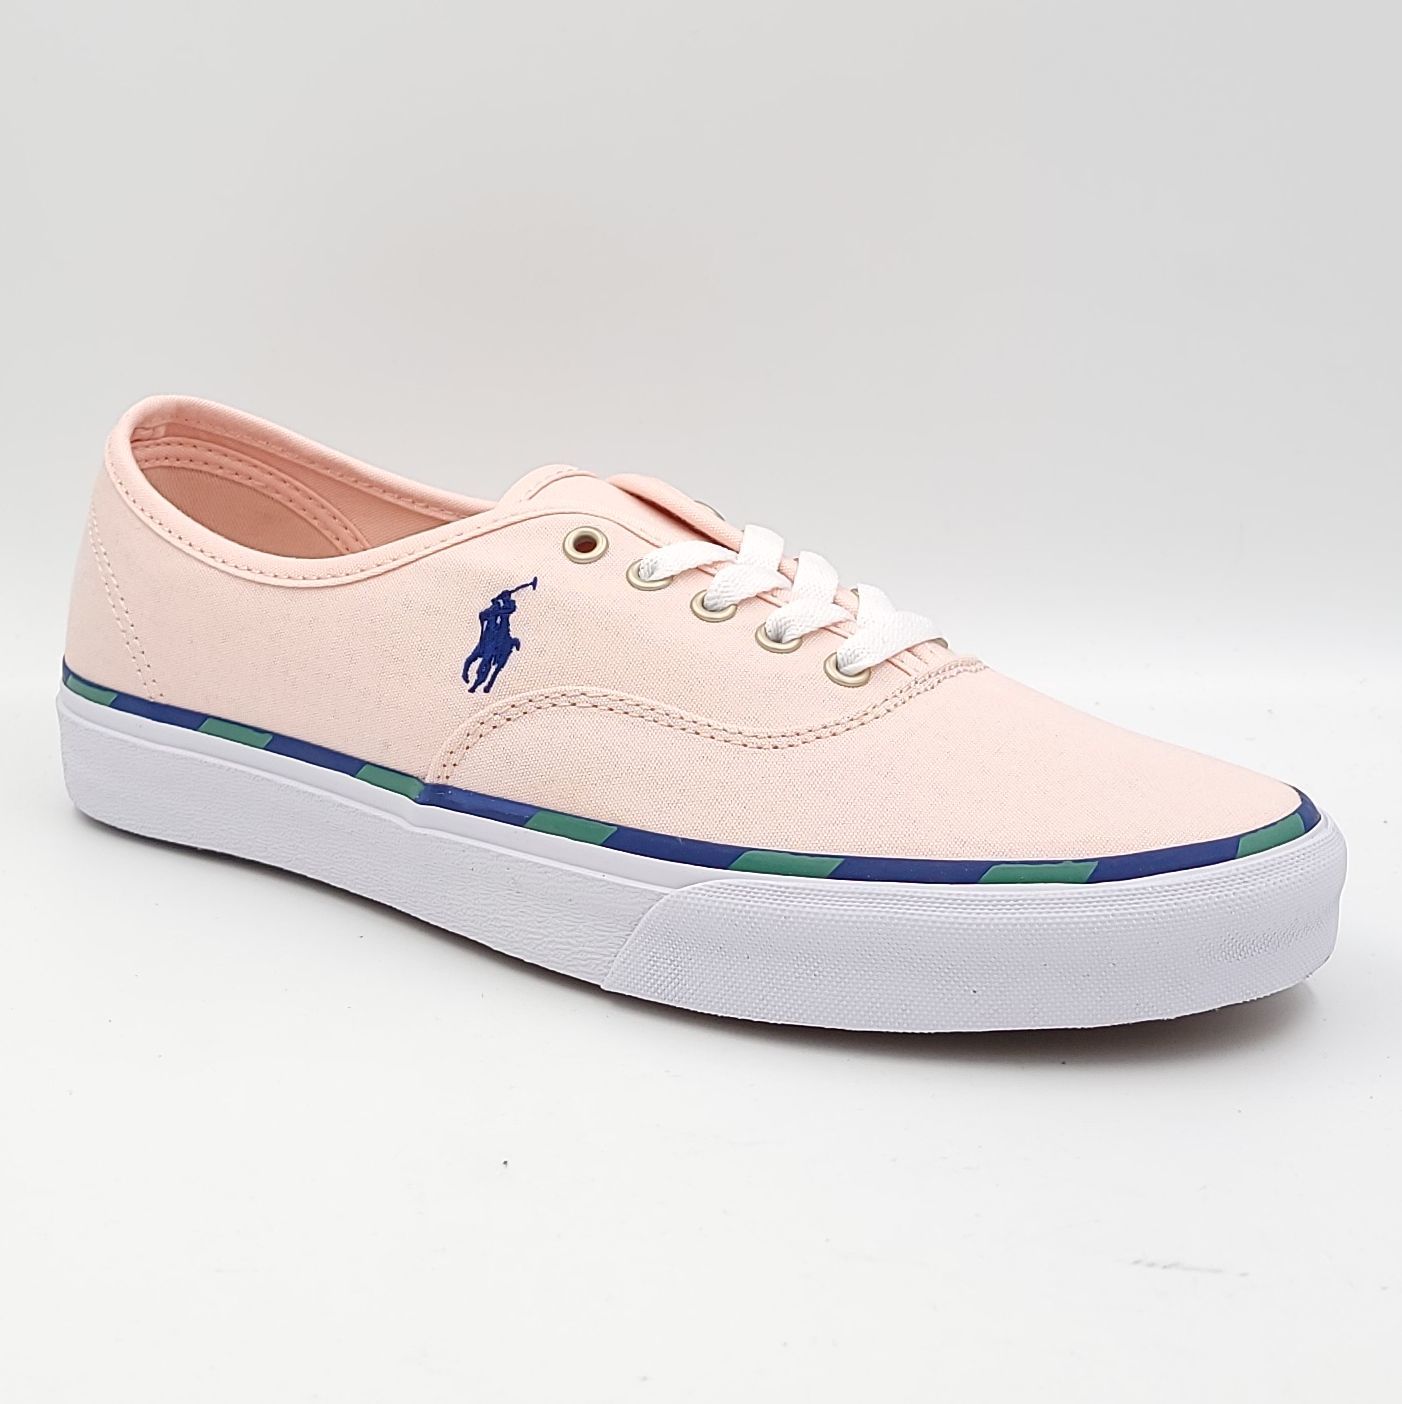 Primary image for Polo Ralph Lauren Men Low Top Sneaker Keaton Pony Size US 10D Carmel Pink Canvas